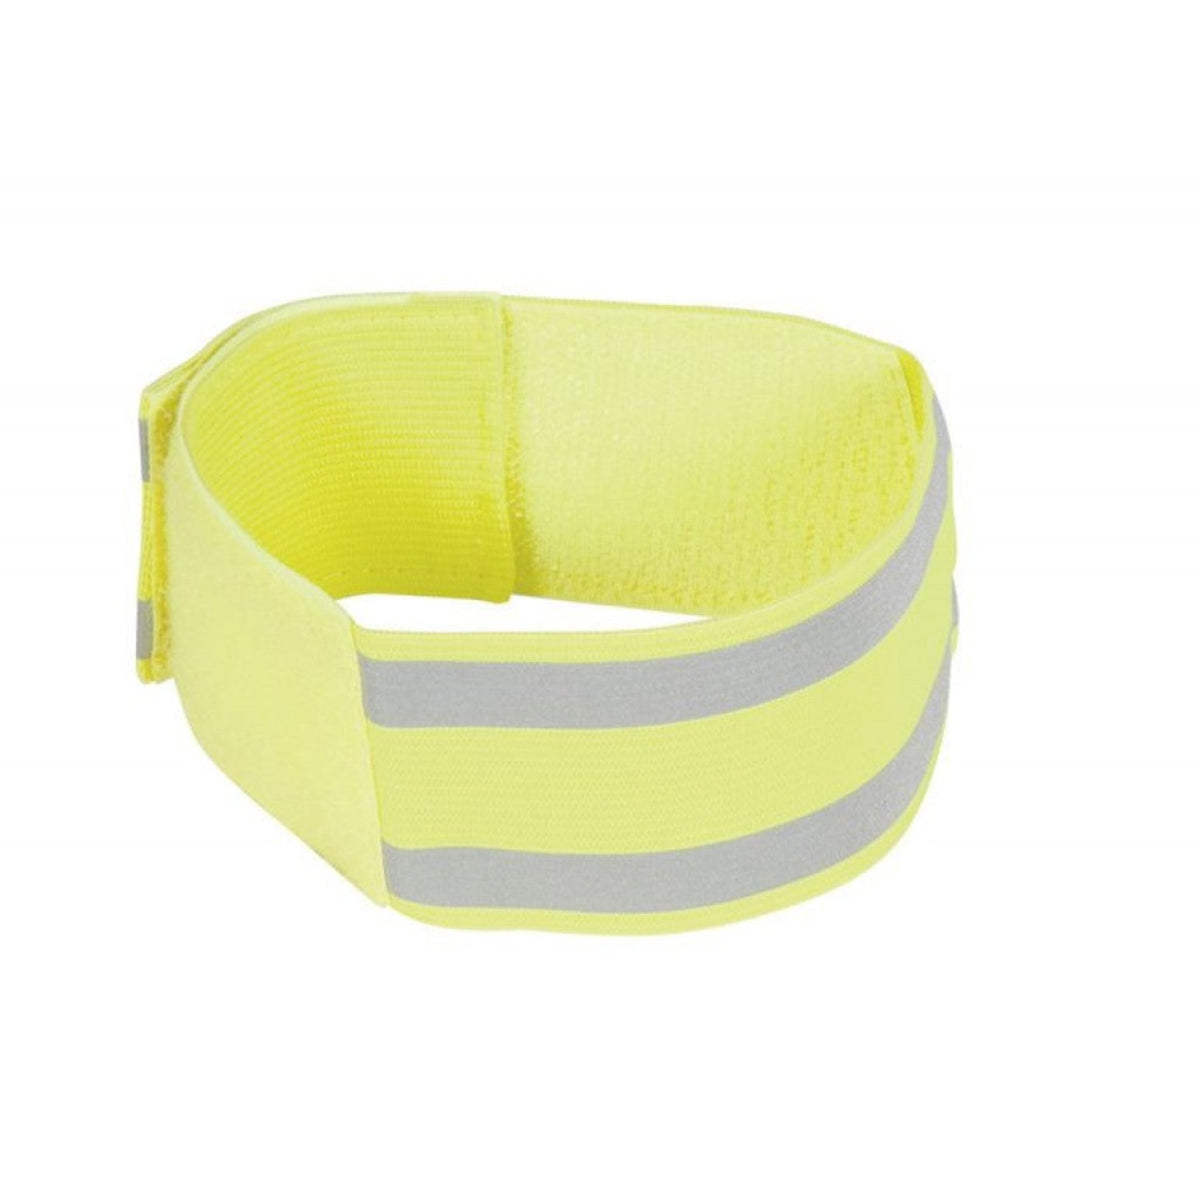 Yellow reflective leg band for horse.